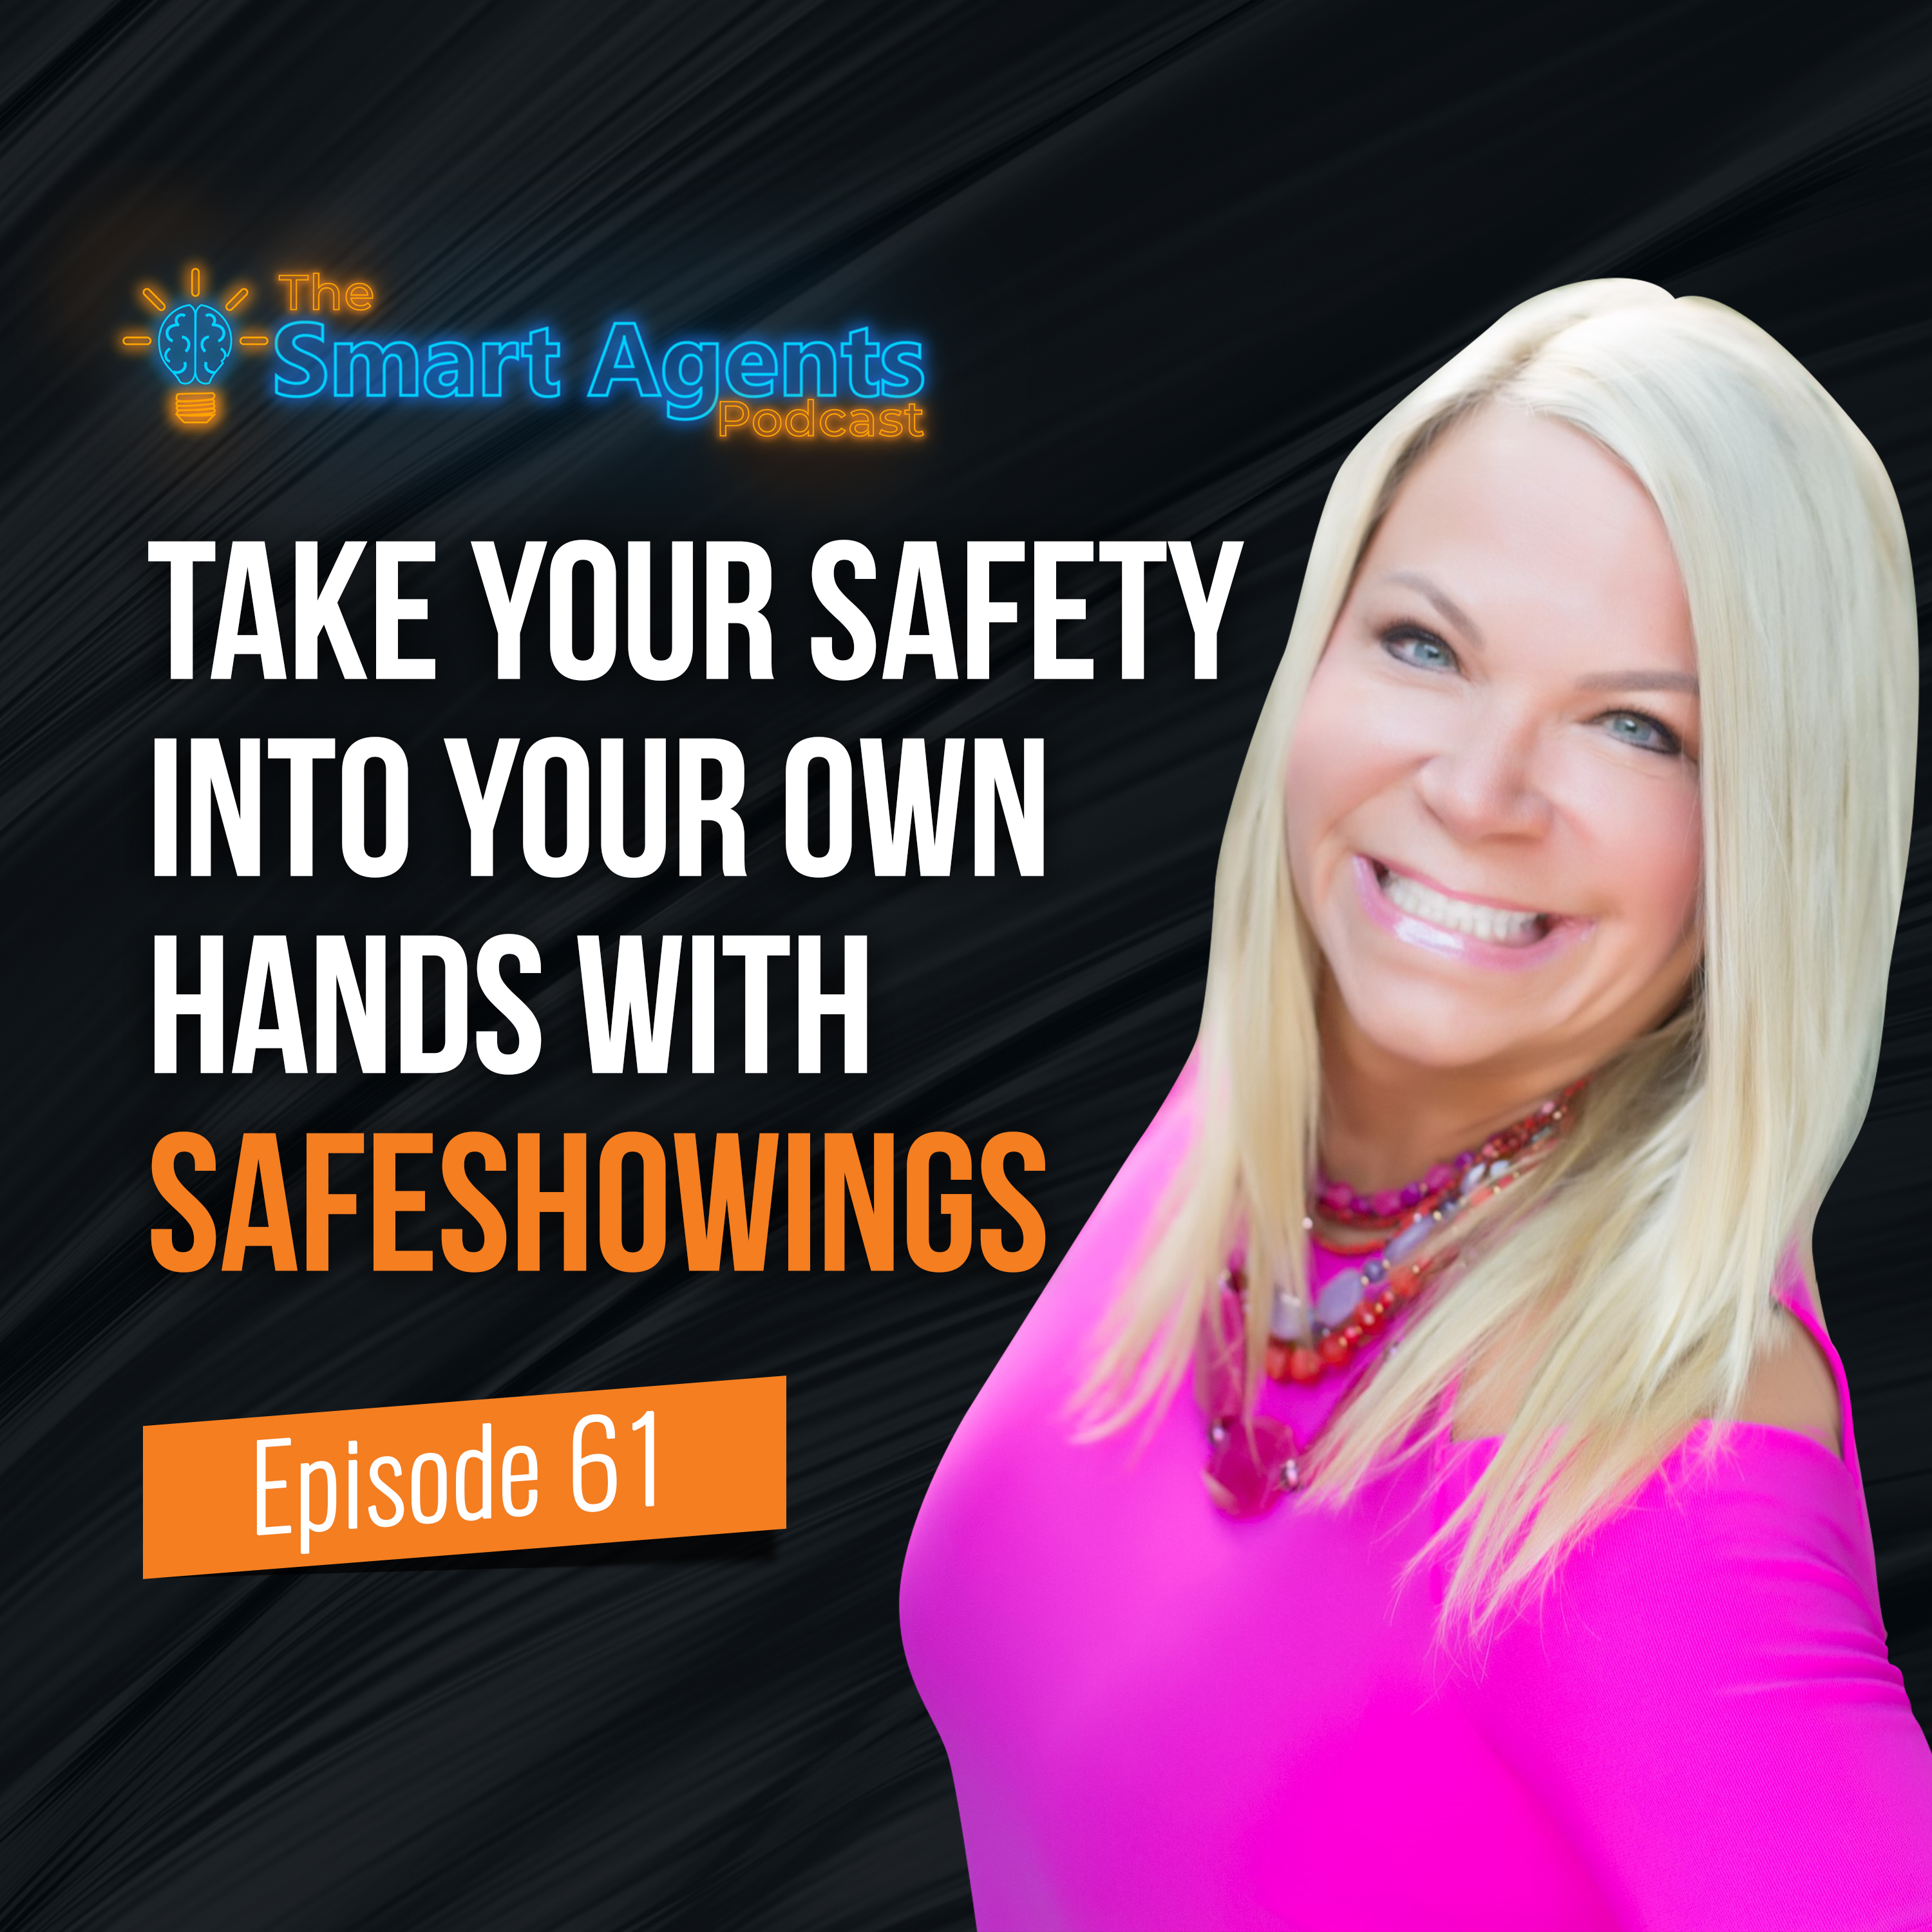 Episode 61: Take Your Safety Into Your Own Hands With SafeShowings